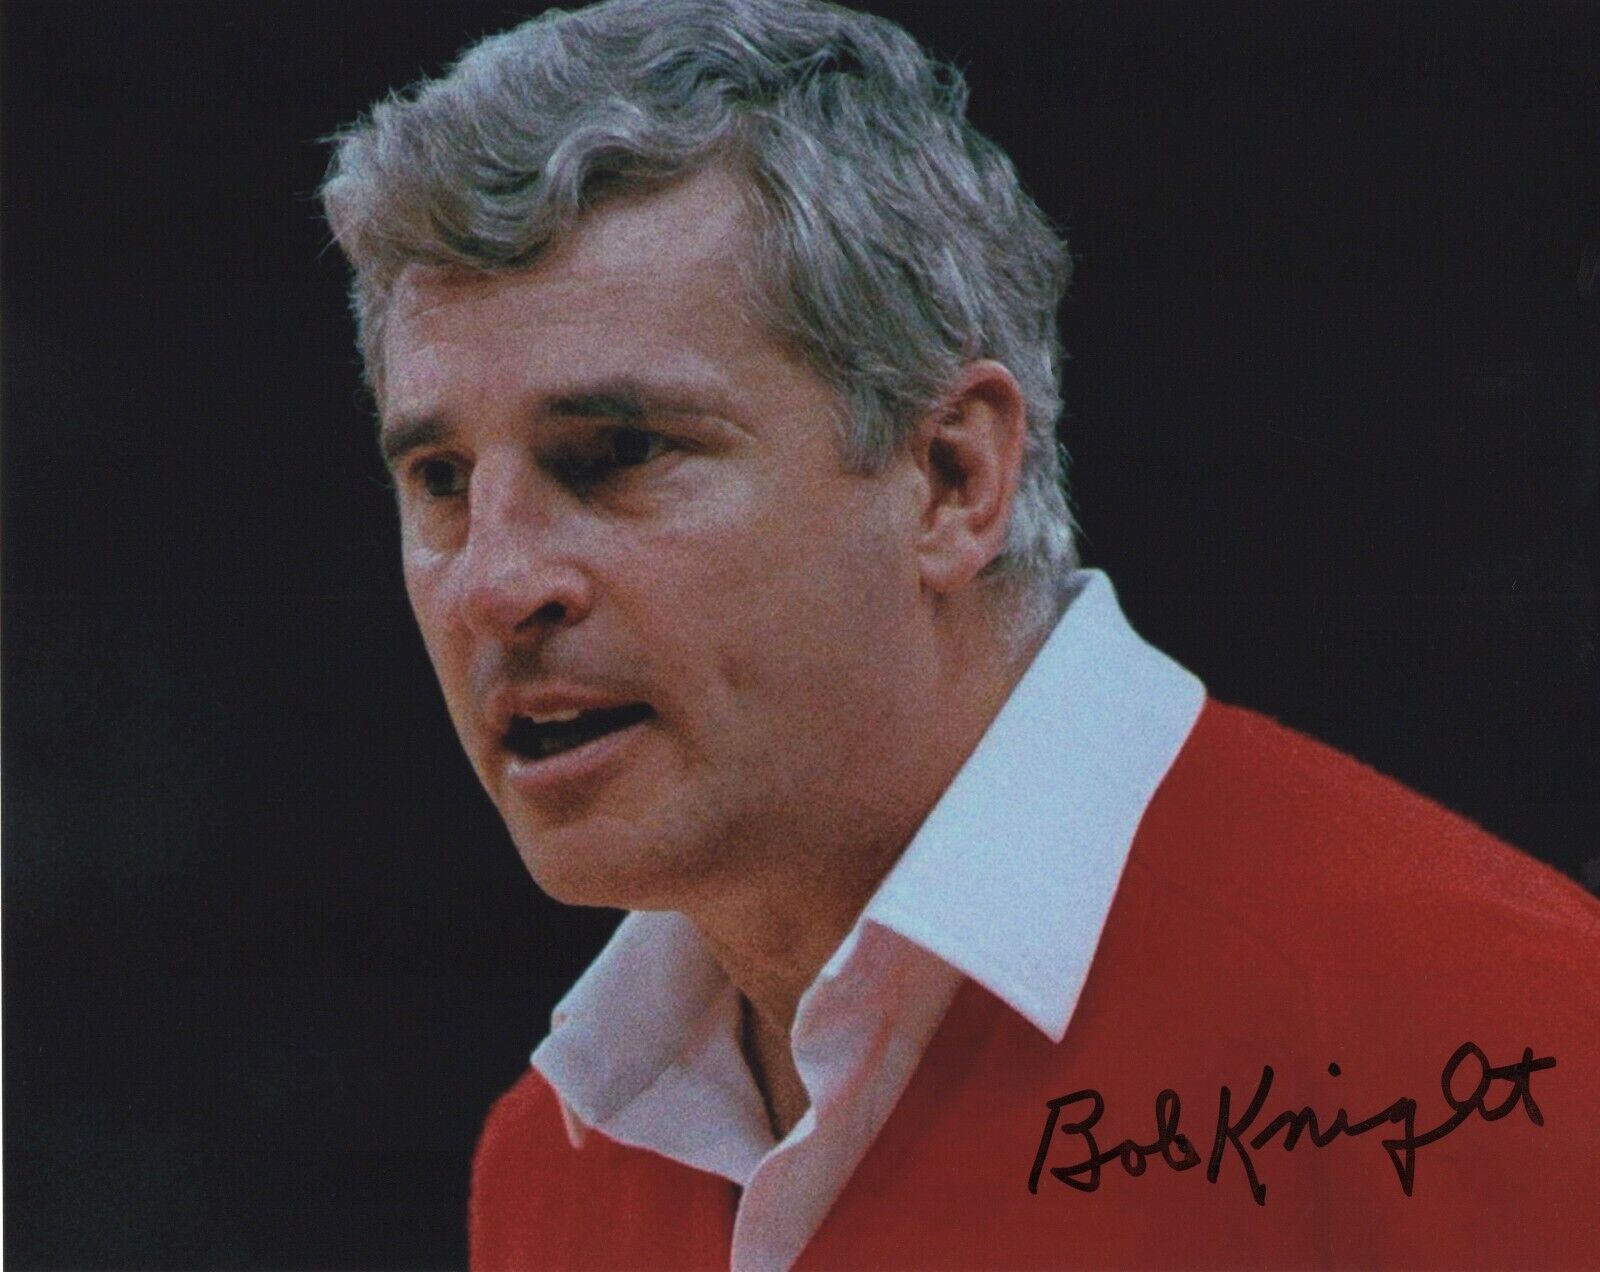 COACH BOBBY KNIGHT SIGNED AUTOGRAPH INDIANA HOOSIERS 8X10 Photo Poster painting #2